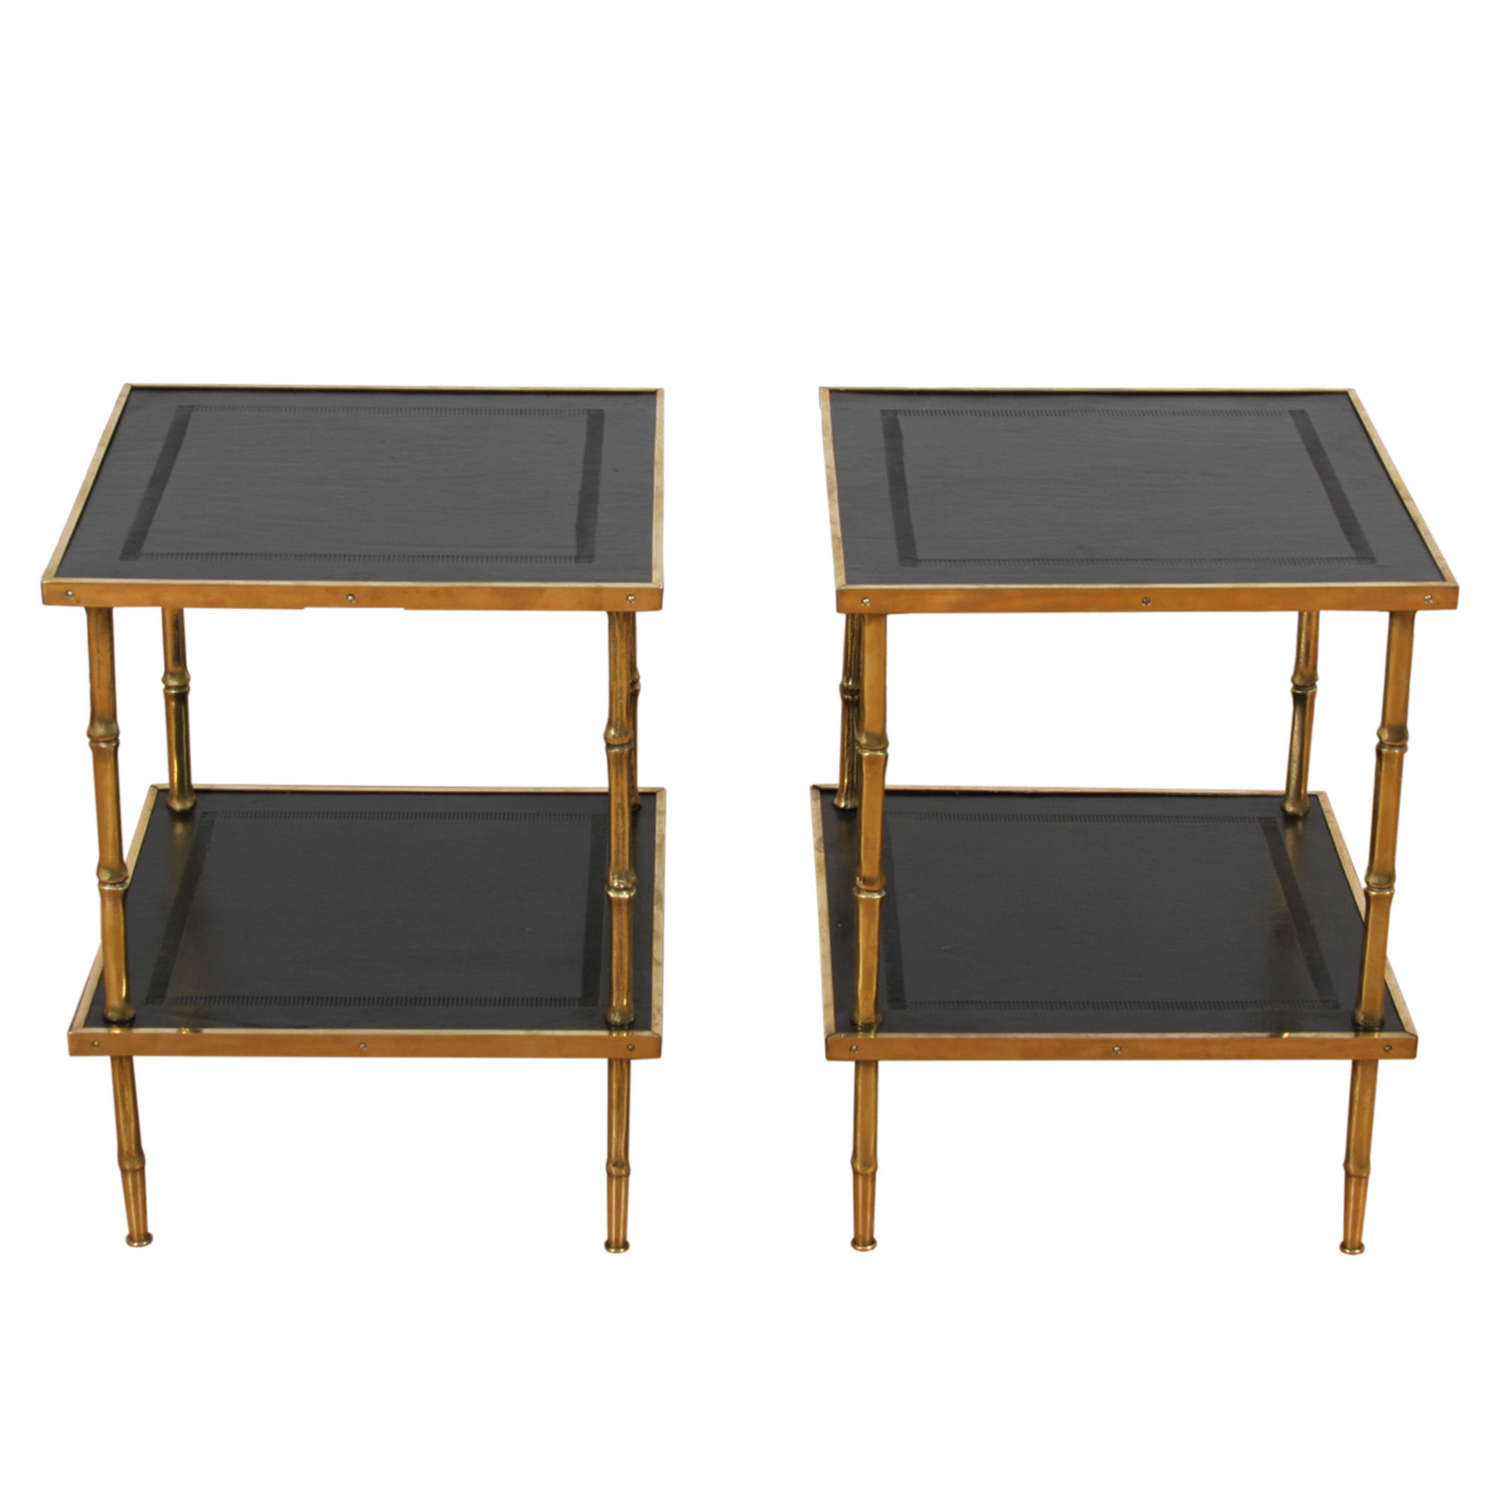 Pair of French 1960s Faux Bamboo Brass and Leather Tables